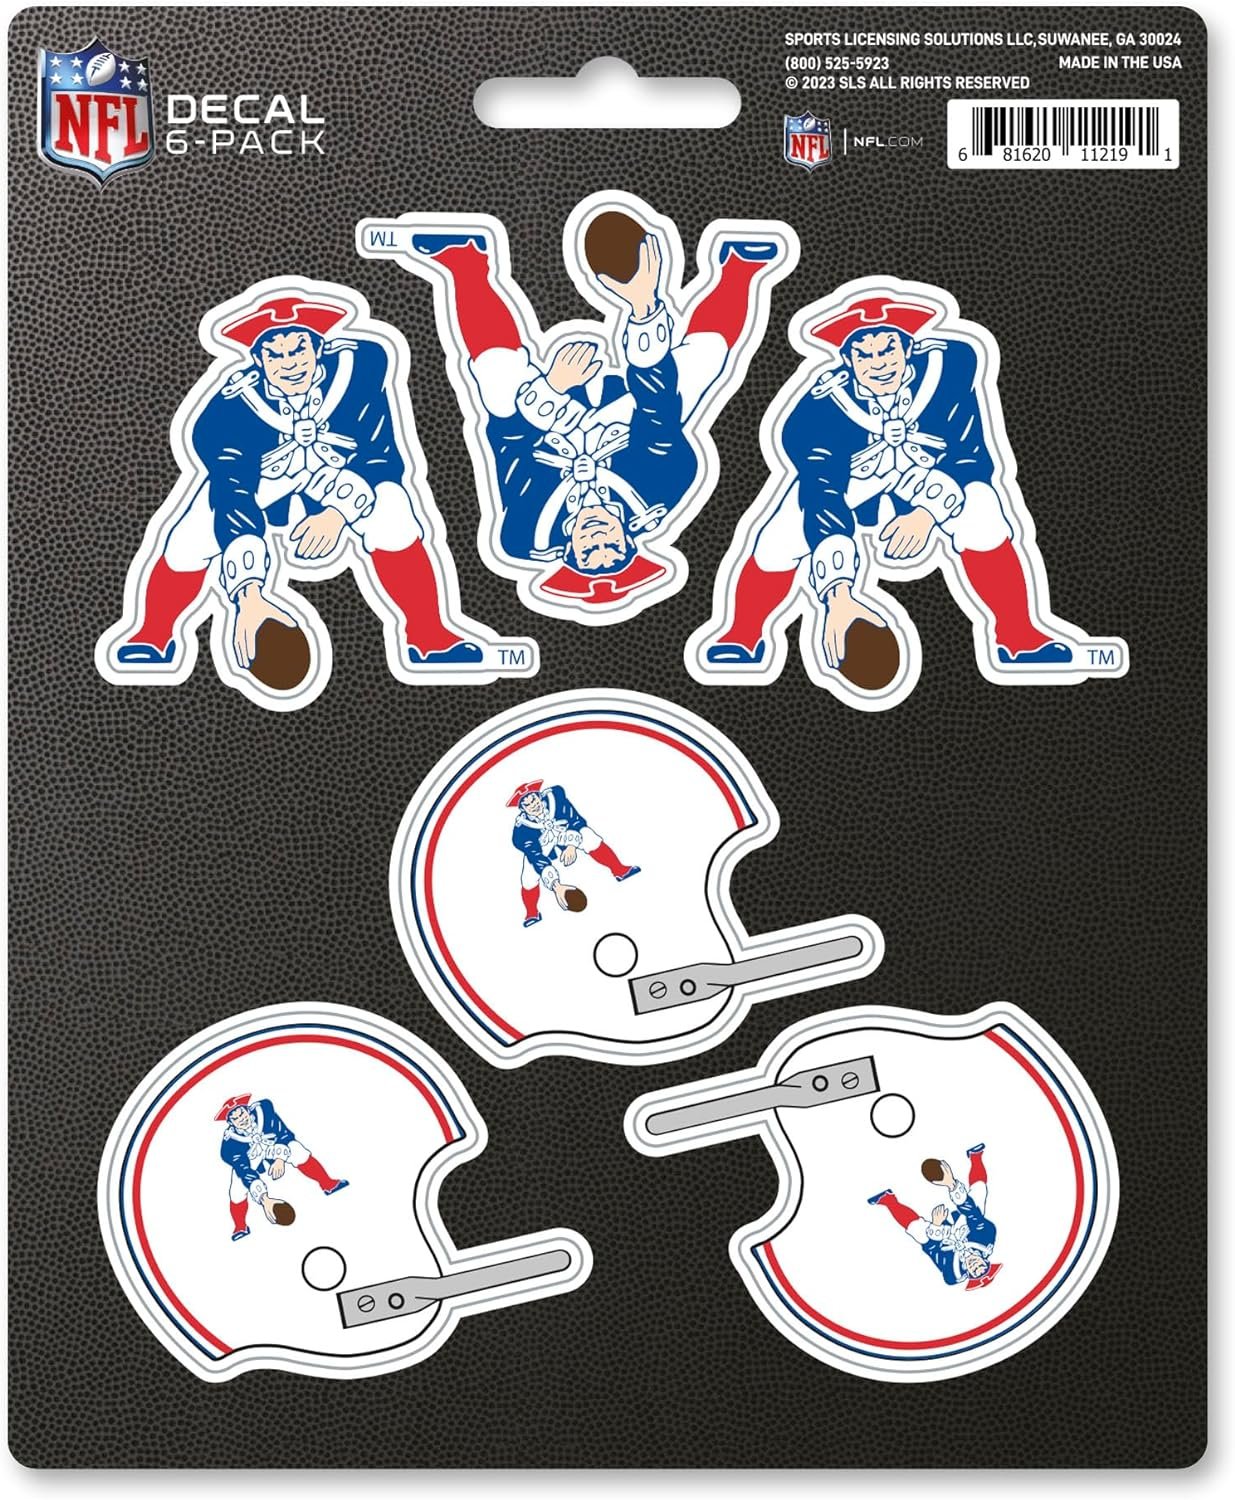 New England Patriots 6-Piece Decal Sticker Set, Vintage Retro Logo, 5x6 Inch Sheet, Gift for football fans for any hard surfaces around home, automotive, personal items